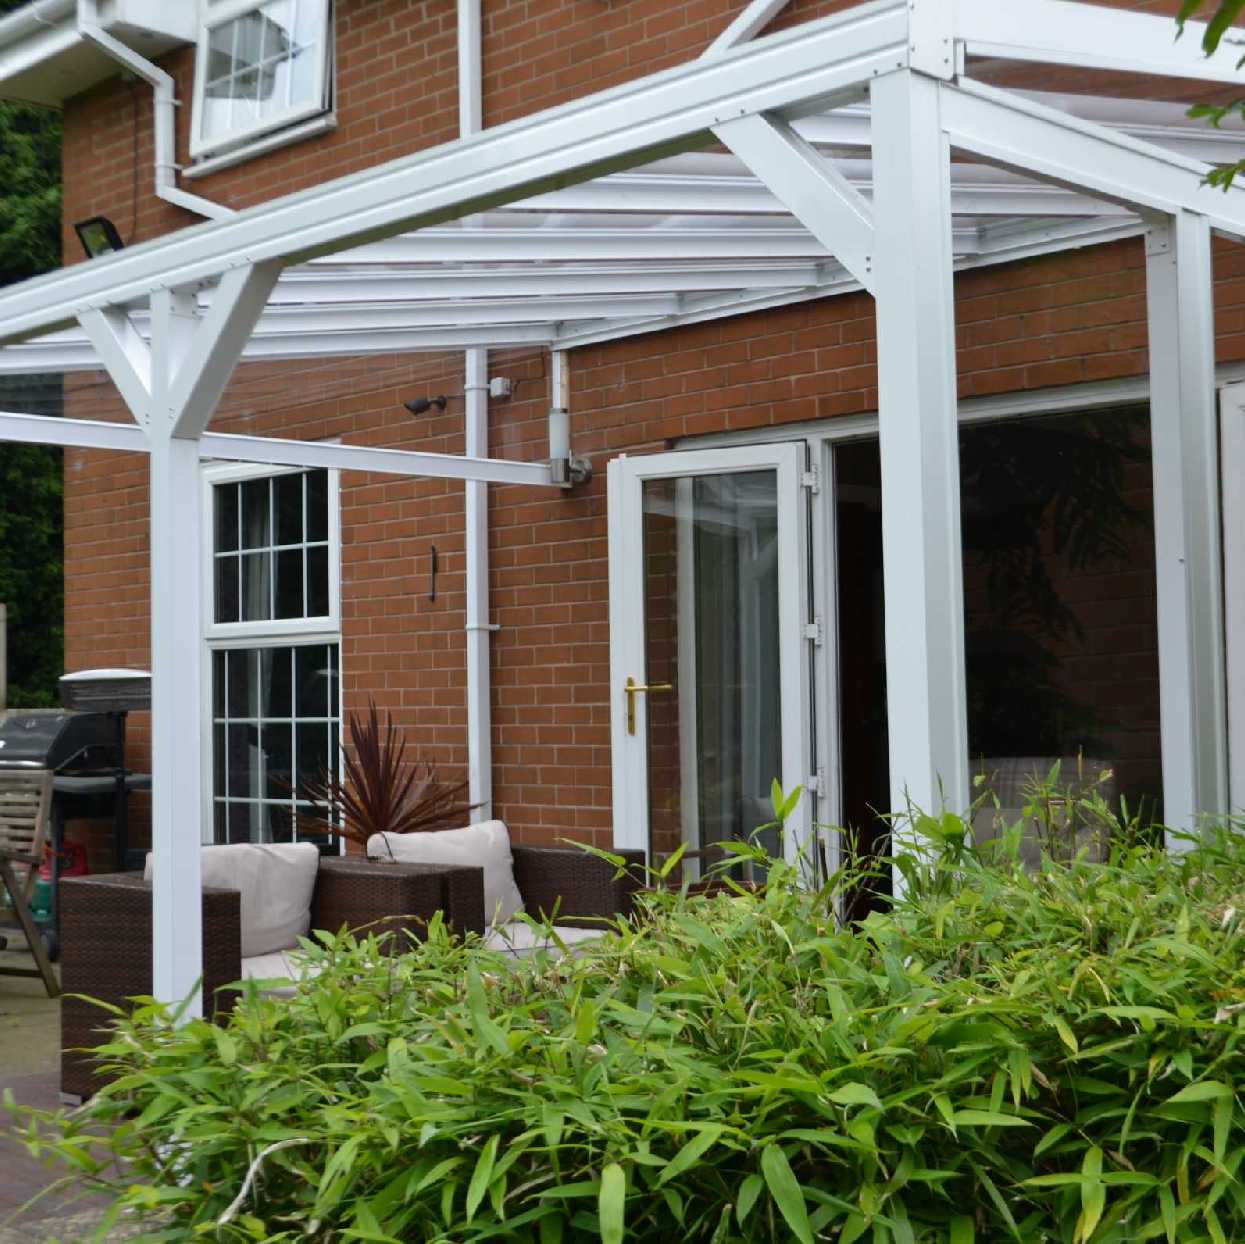 Omega Smart Lean-To Canopy, White with 6mm Glass Clear Plate Polycarbonate Glazing - 9.8m (W) x 3.0m (P), (5) Supporting Posts from Omega Build